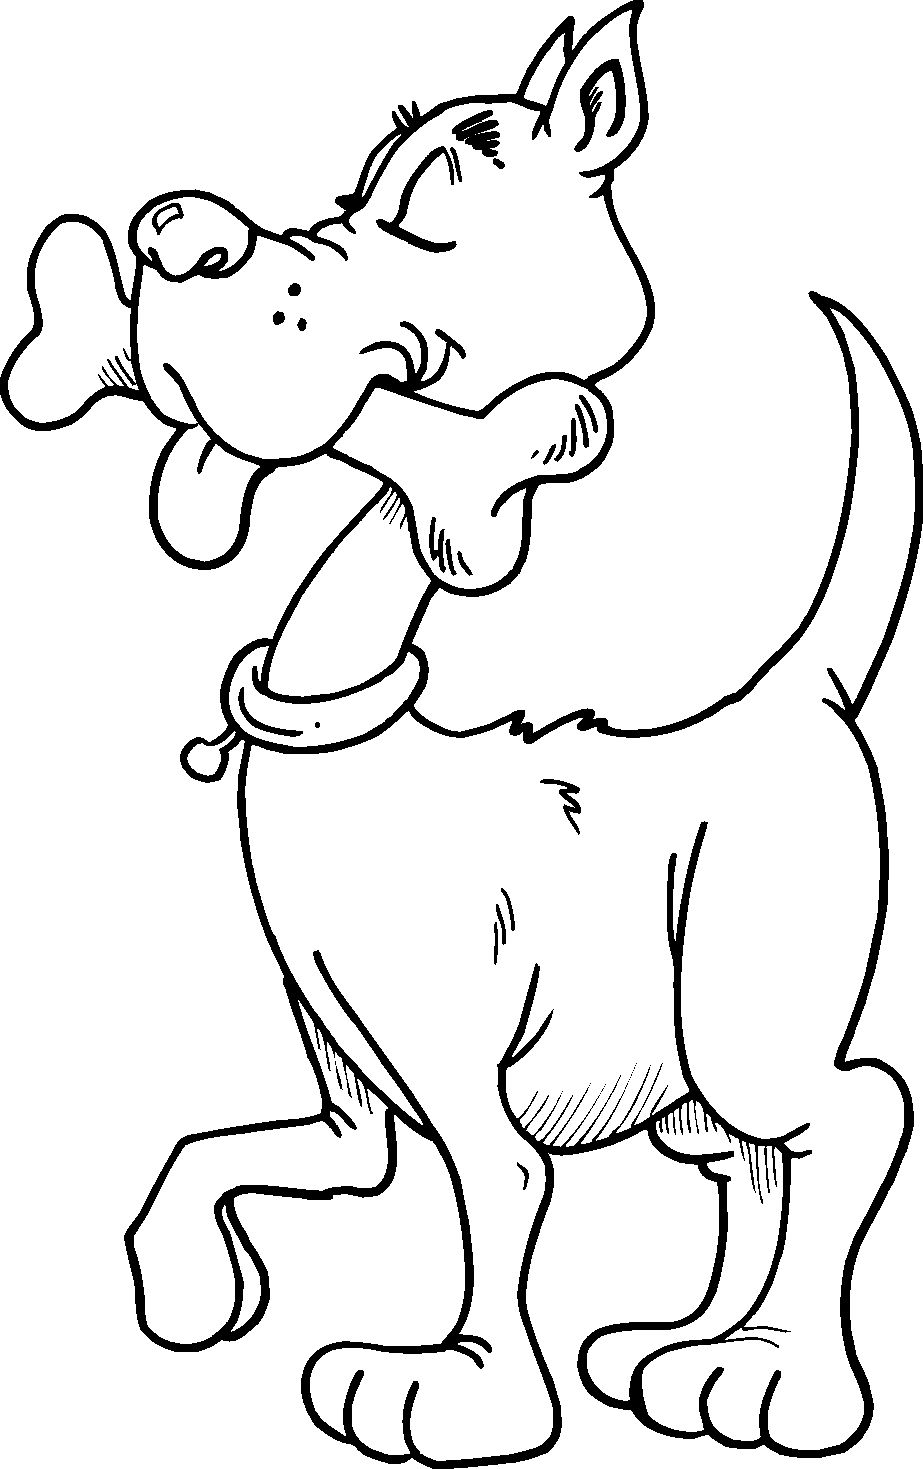 Cartoon Coloring Pages Best Coloring Pages For Kids 13 Cartoon